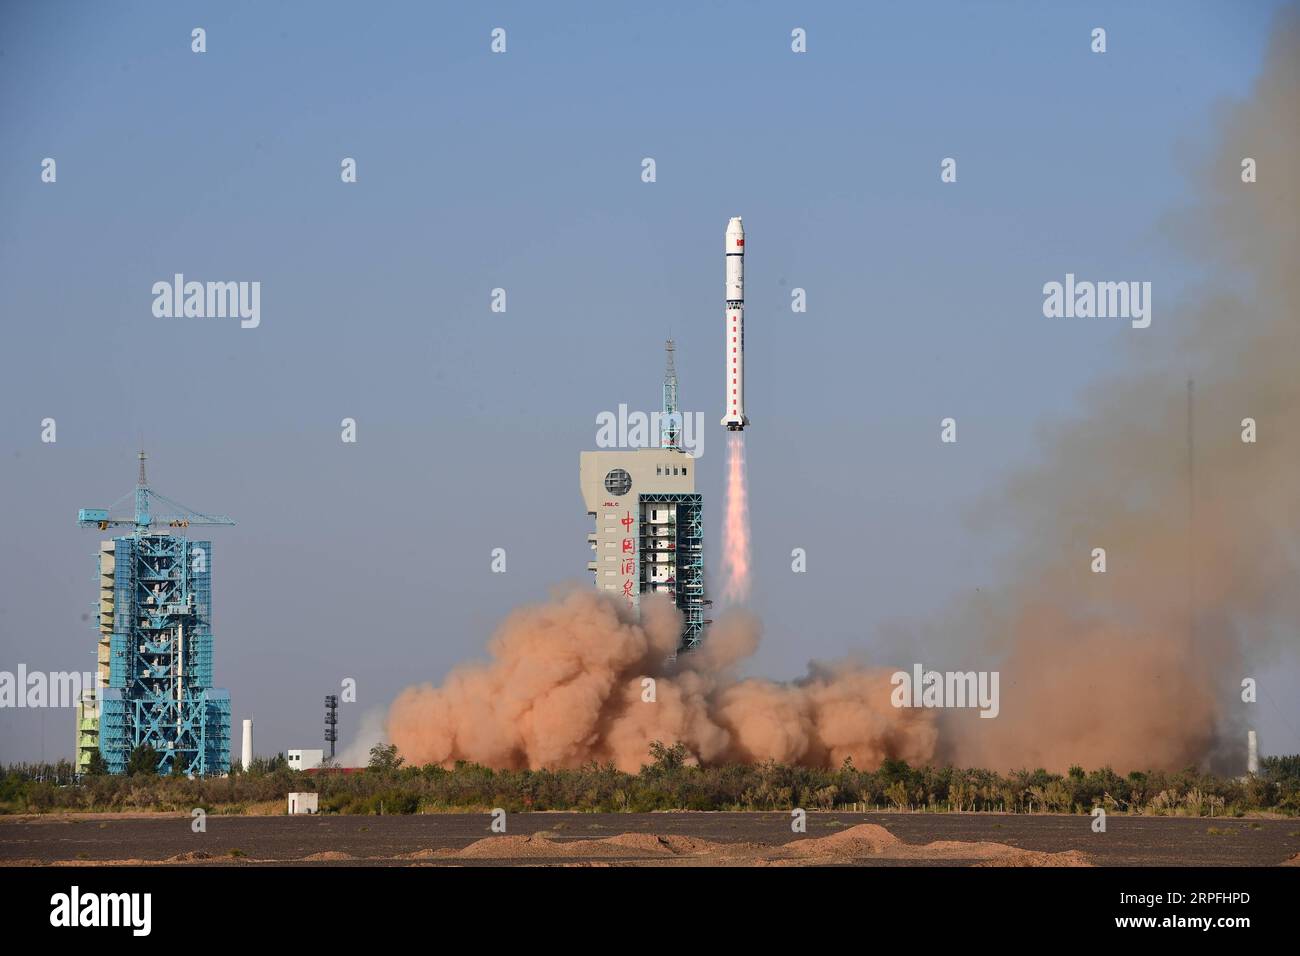 190925 -- JIUQUAN, Sept. 25, 2019 Xinhua -- China sends the Yunhai-1 02 satellite into planned orbit from the Jiuquan Satellite Launch Center in Jiuquan, northwest China s Gansu Province, Sept. 25, 2019. Launched on a Long March-2D carrier rocket, the new satellite will be mainly used for detecting the atmospheric and marine environment and space environment, as well as disaster control and other scientific experiments. Photo by Wang Jiangbo/Xinhua CHINA-JIUQUAN-YUNHAI-SATELLITE-LAUNCH CN PUBLICATIONxNOTxINxCHN Stock Photo